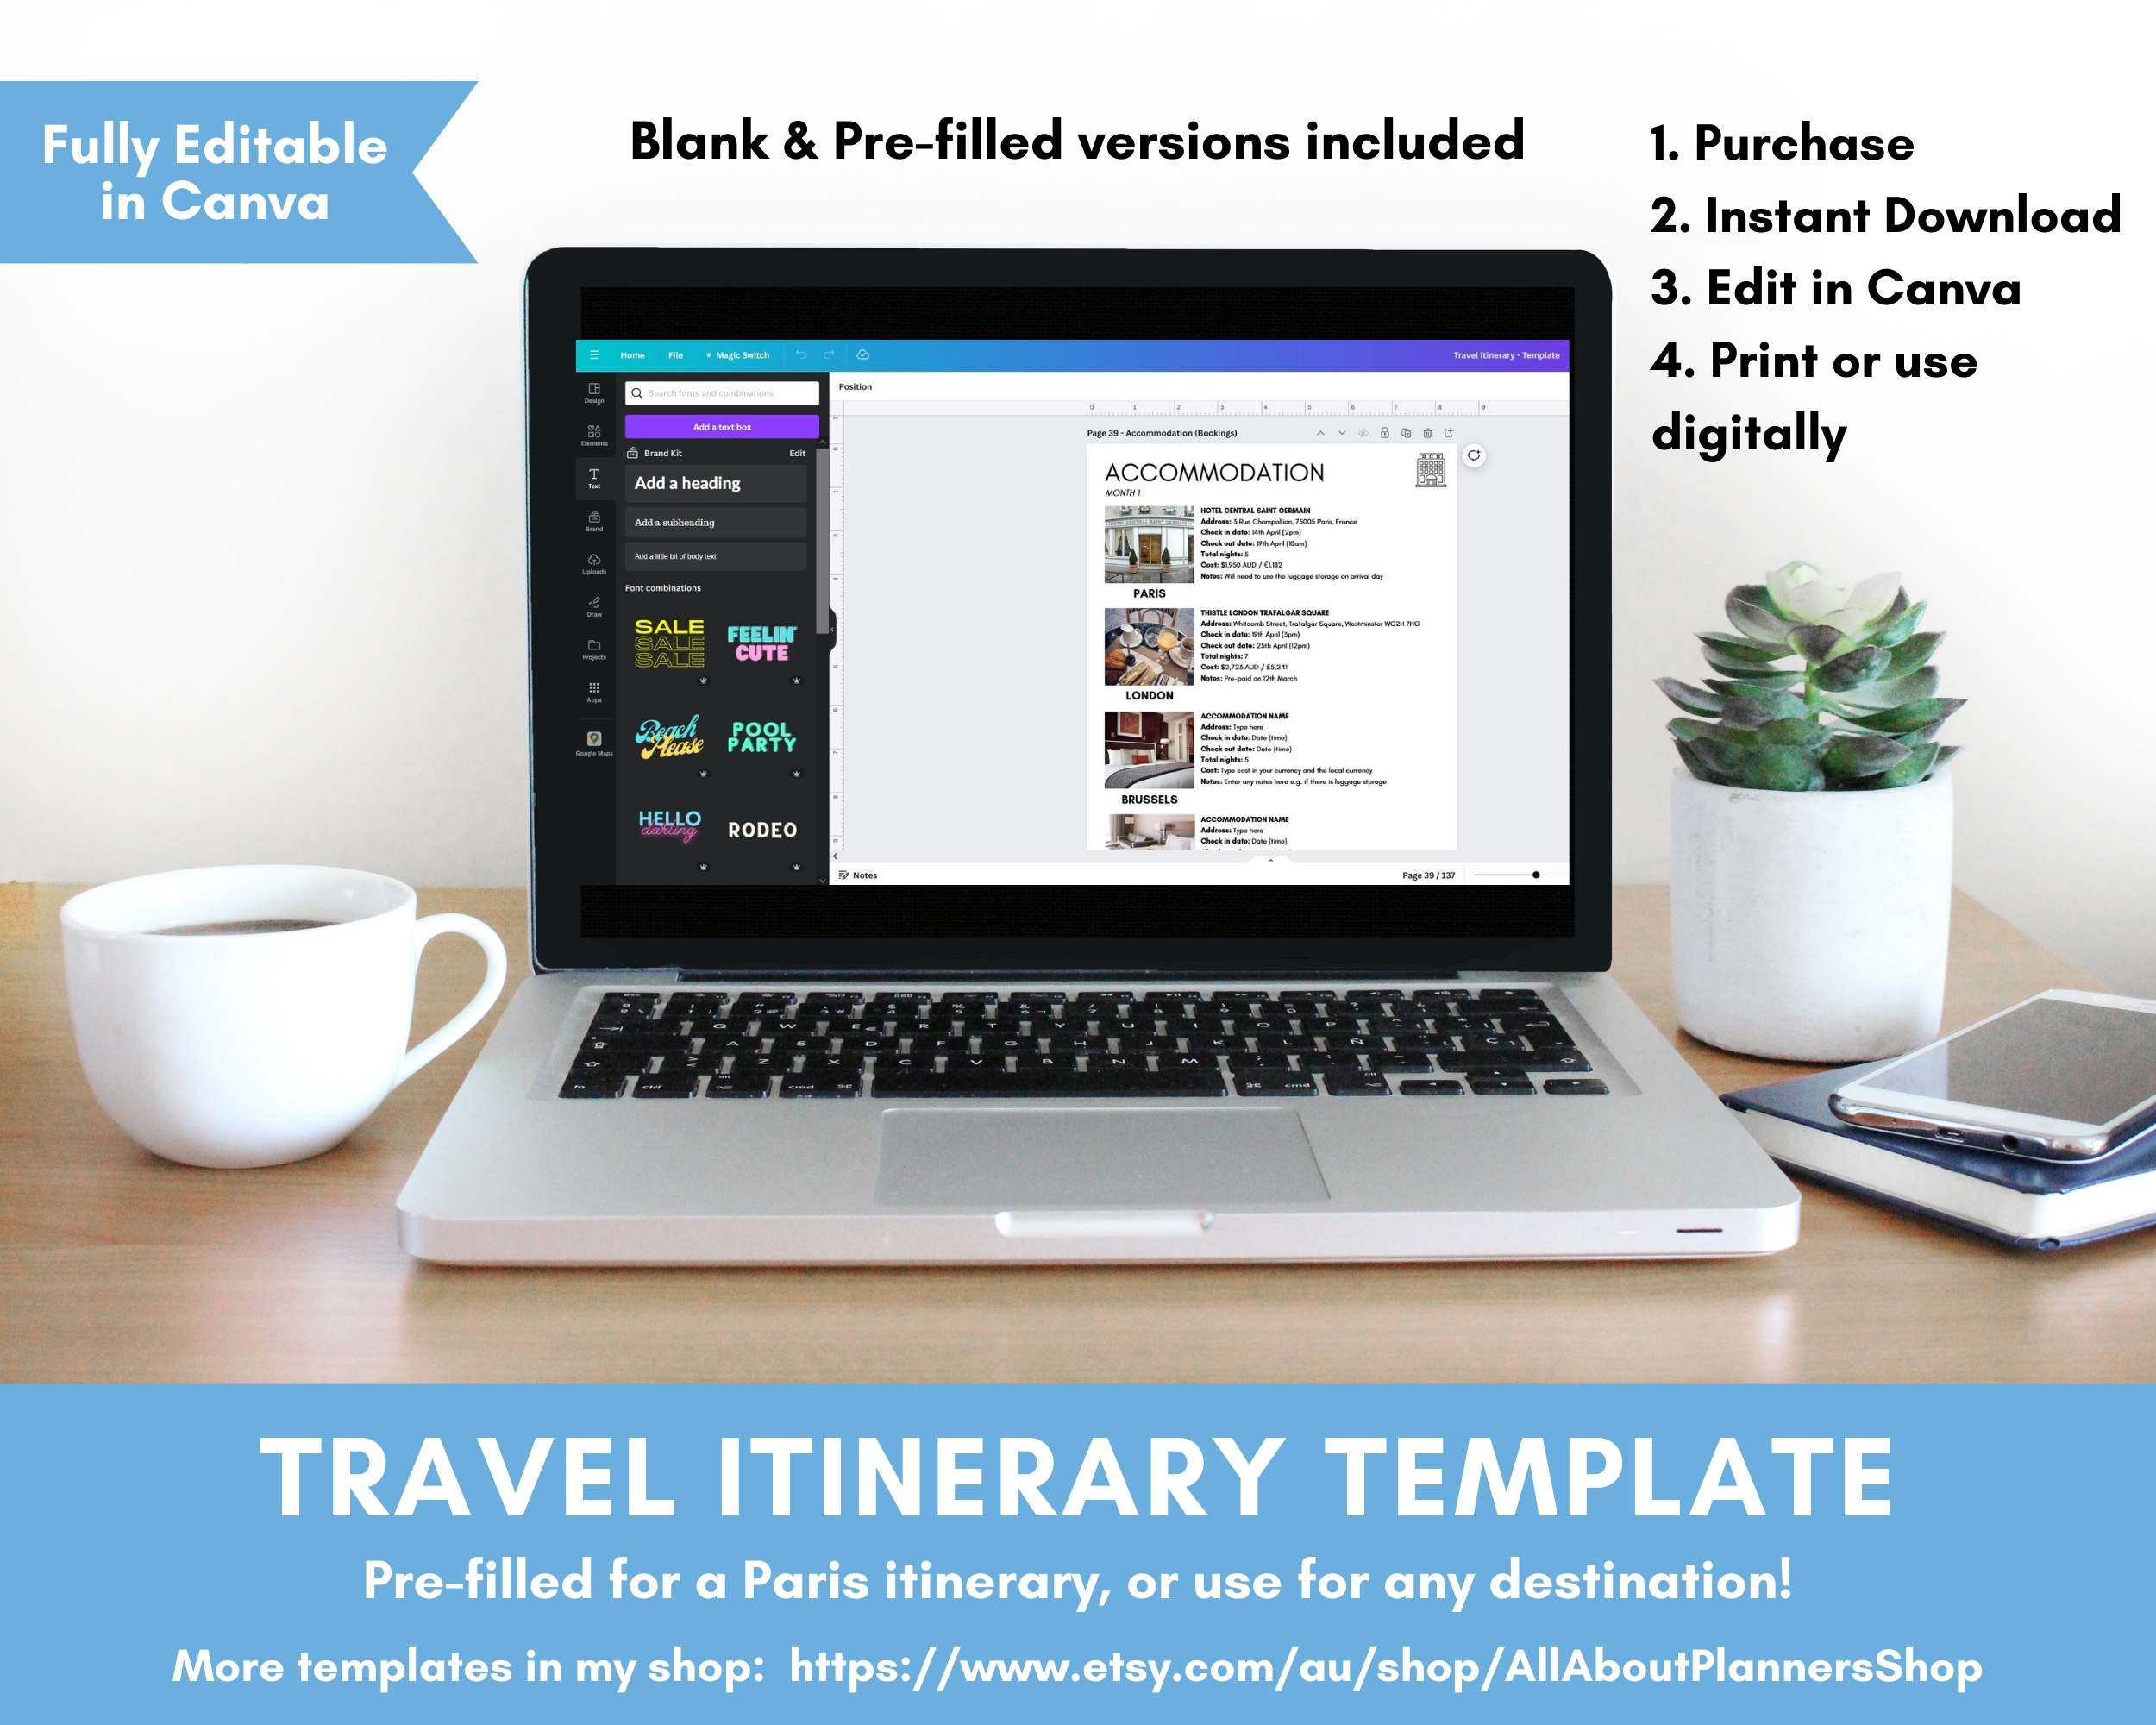 Travel itinerary template canva fully editable customisable simple easy to use for any destination weekend week month long overseas europe paris itinerary